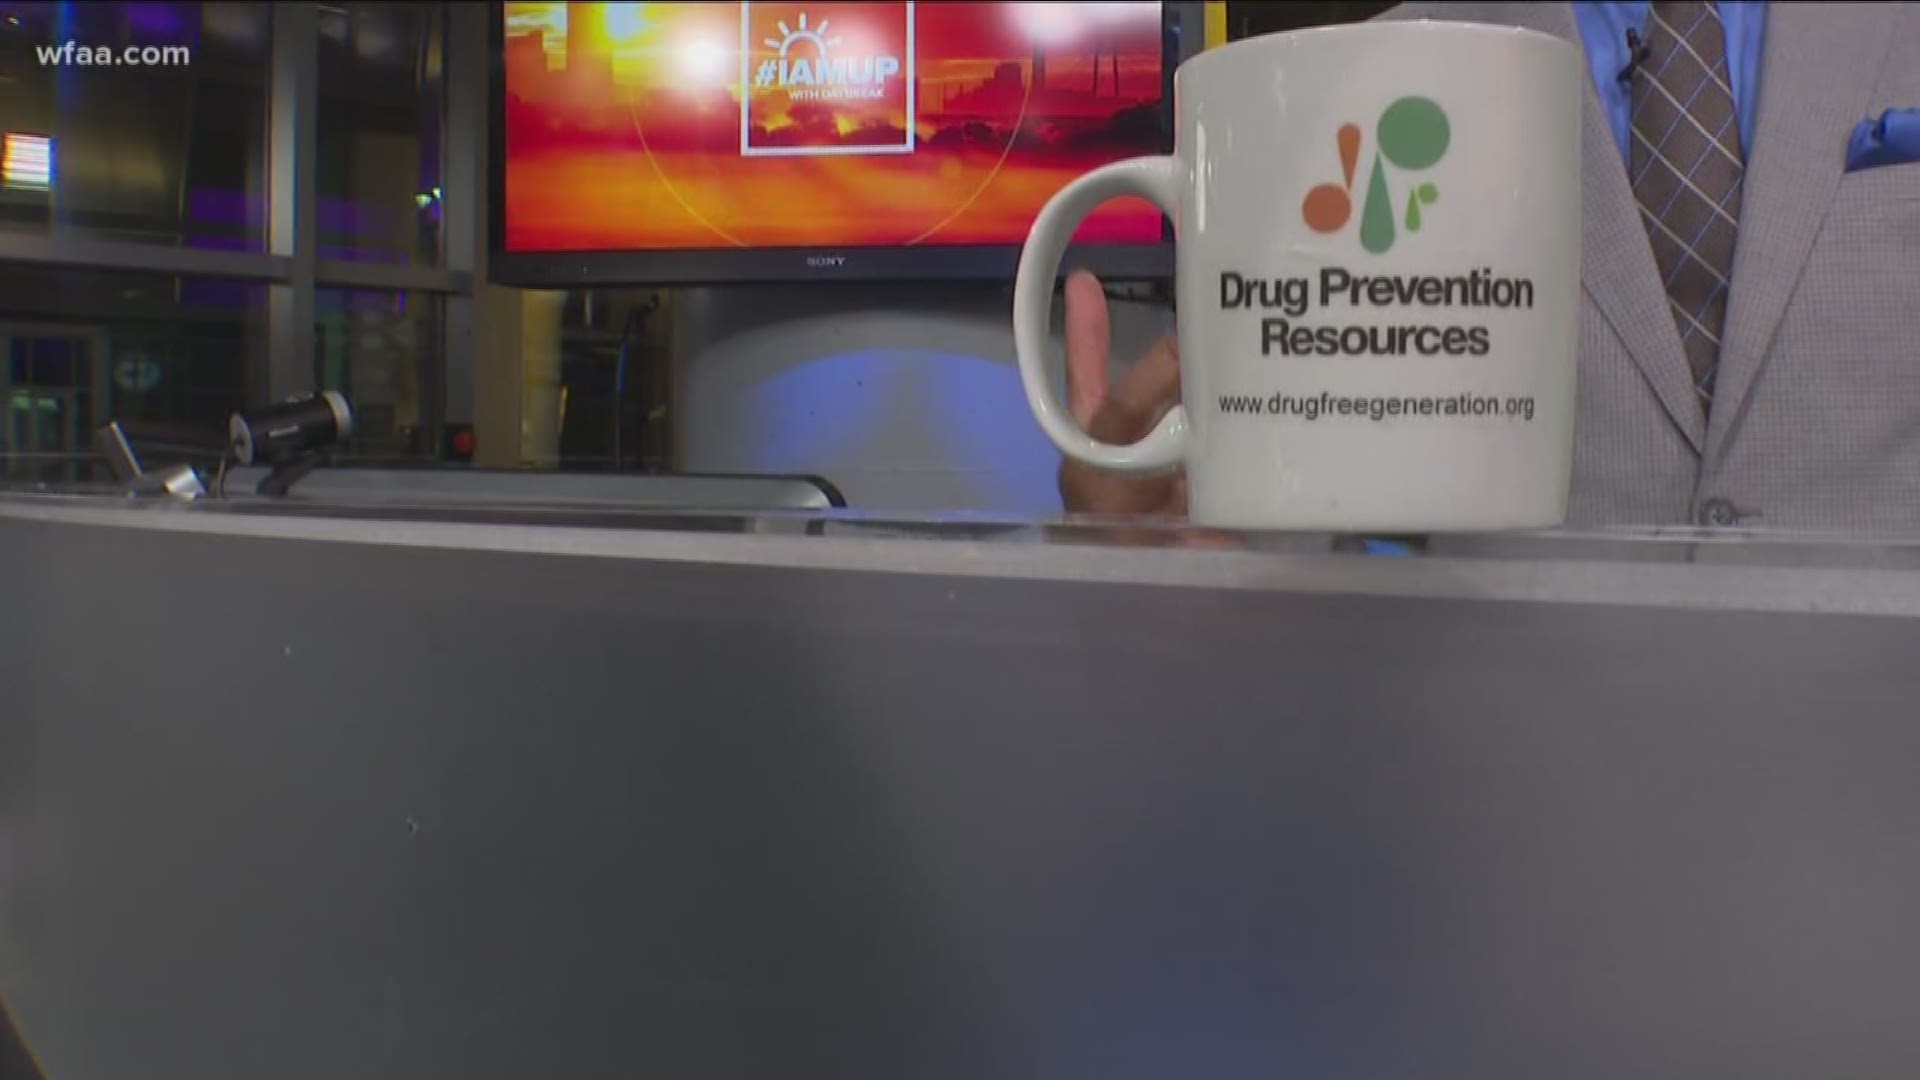 What's up with Greg's cup? Drug Prevention Resources